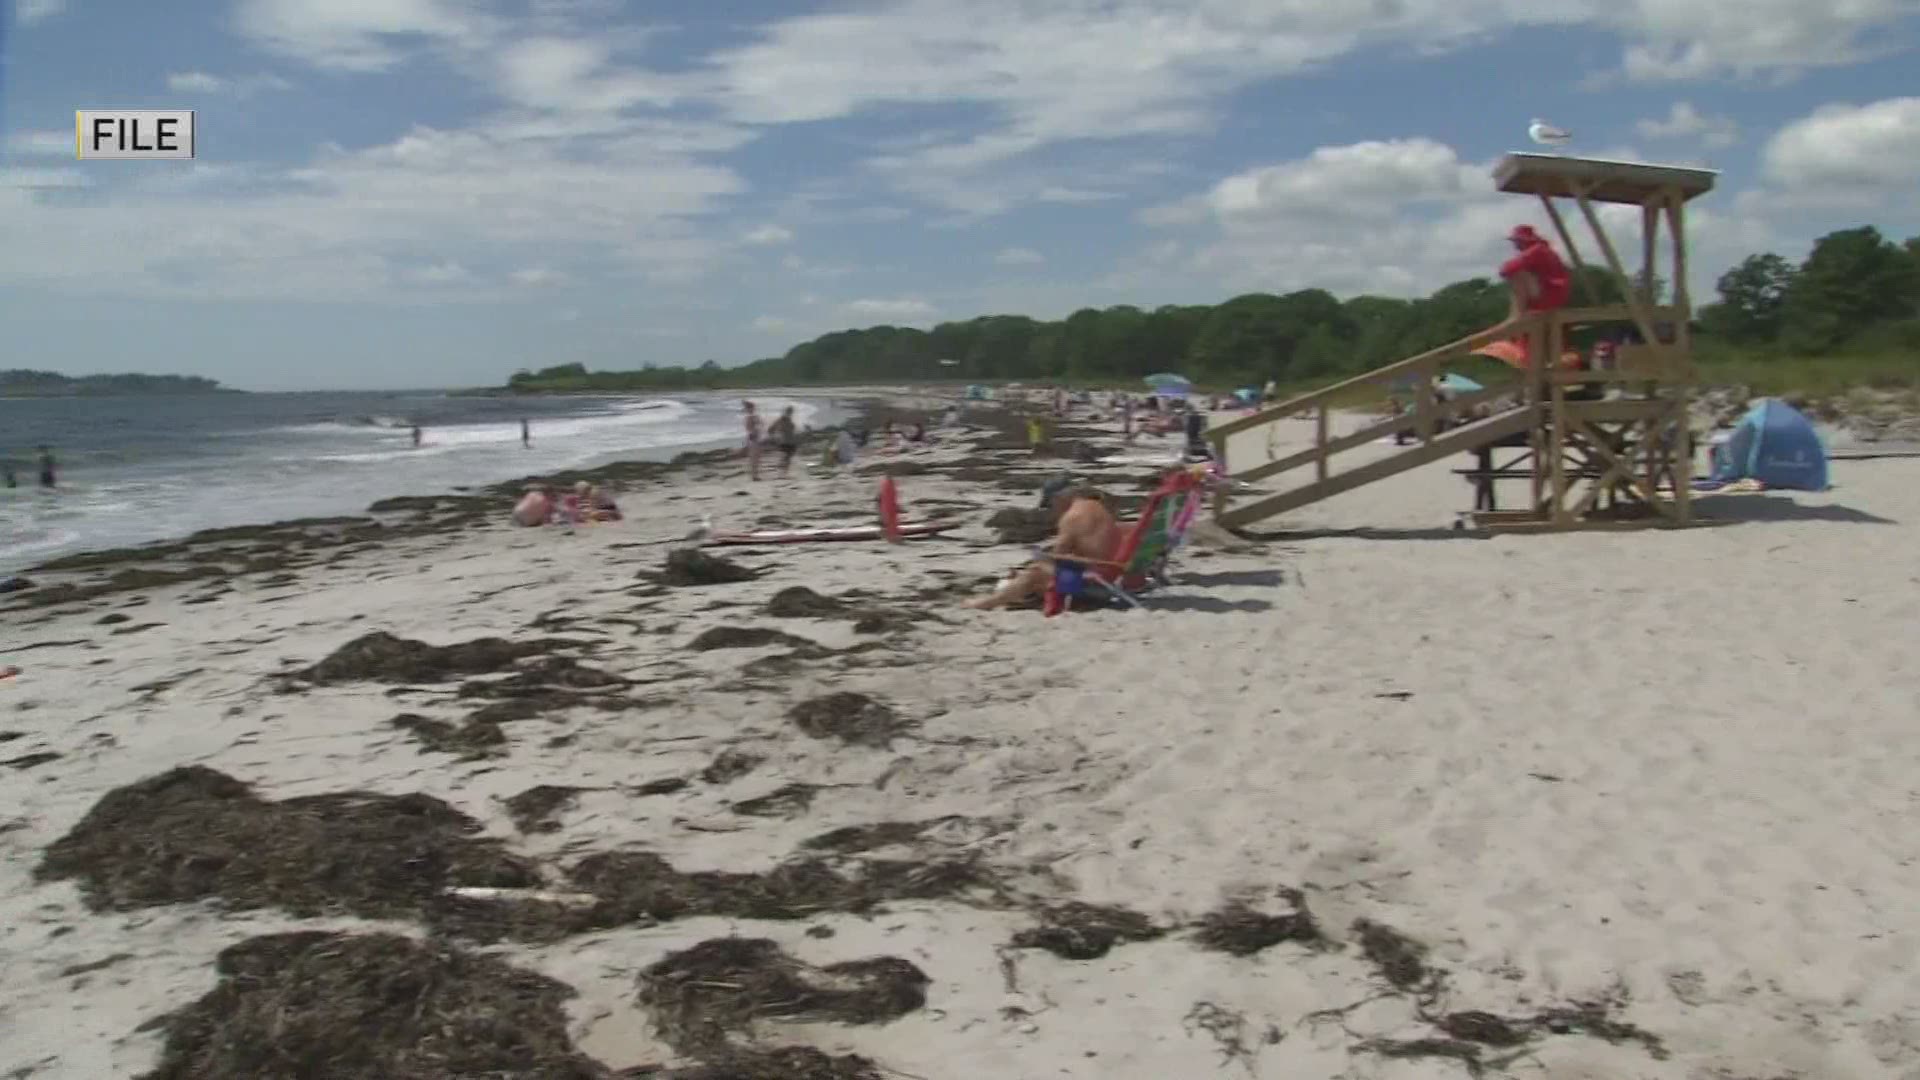 After a New York woman was killed by a shark off Bailey Island last July, several beaches are adding warning flags to give swimmers a heads up about potential risks